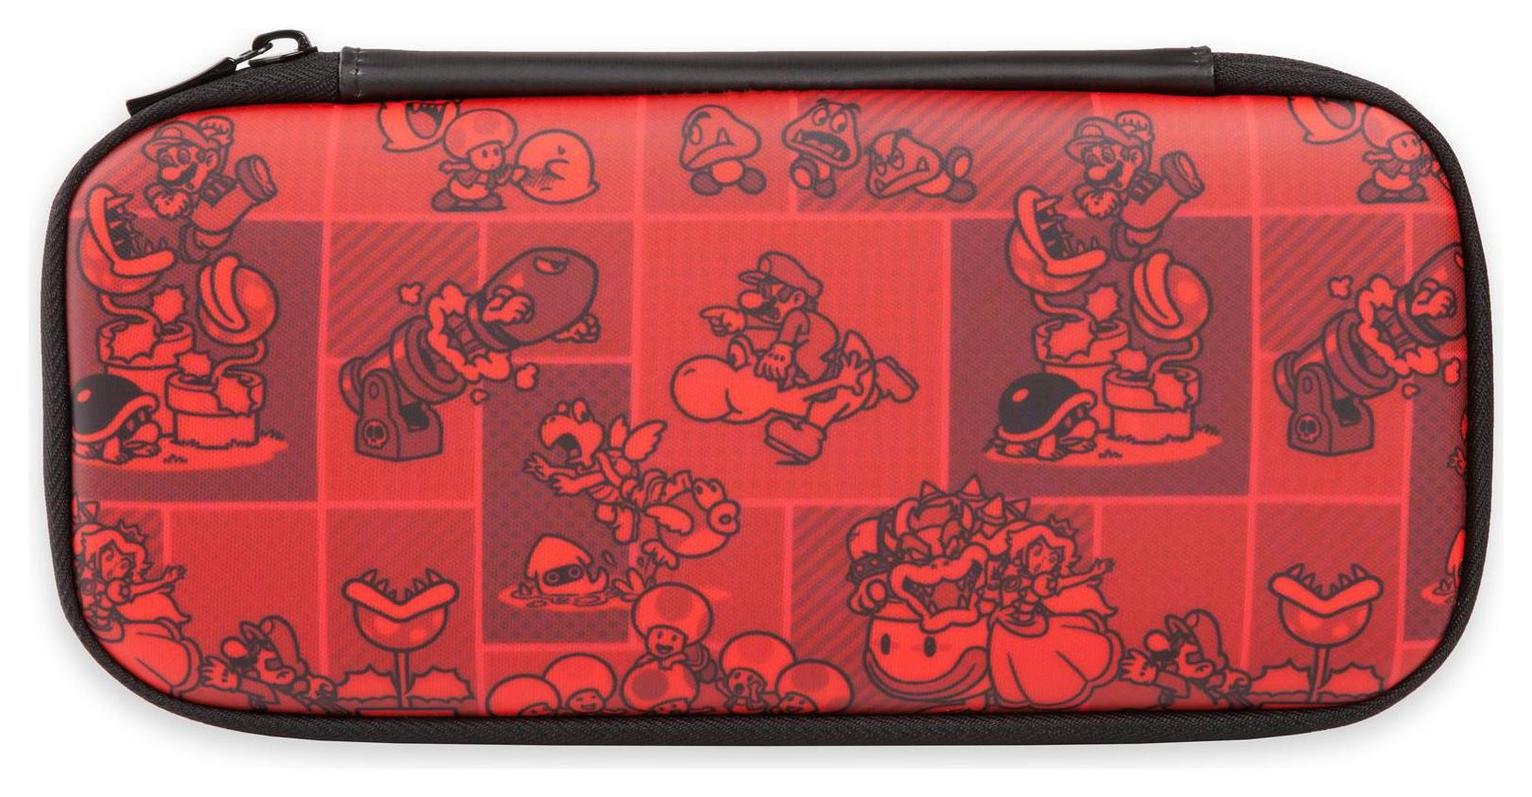 mario red switch